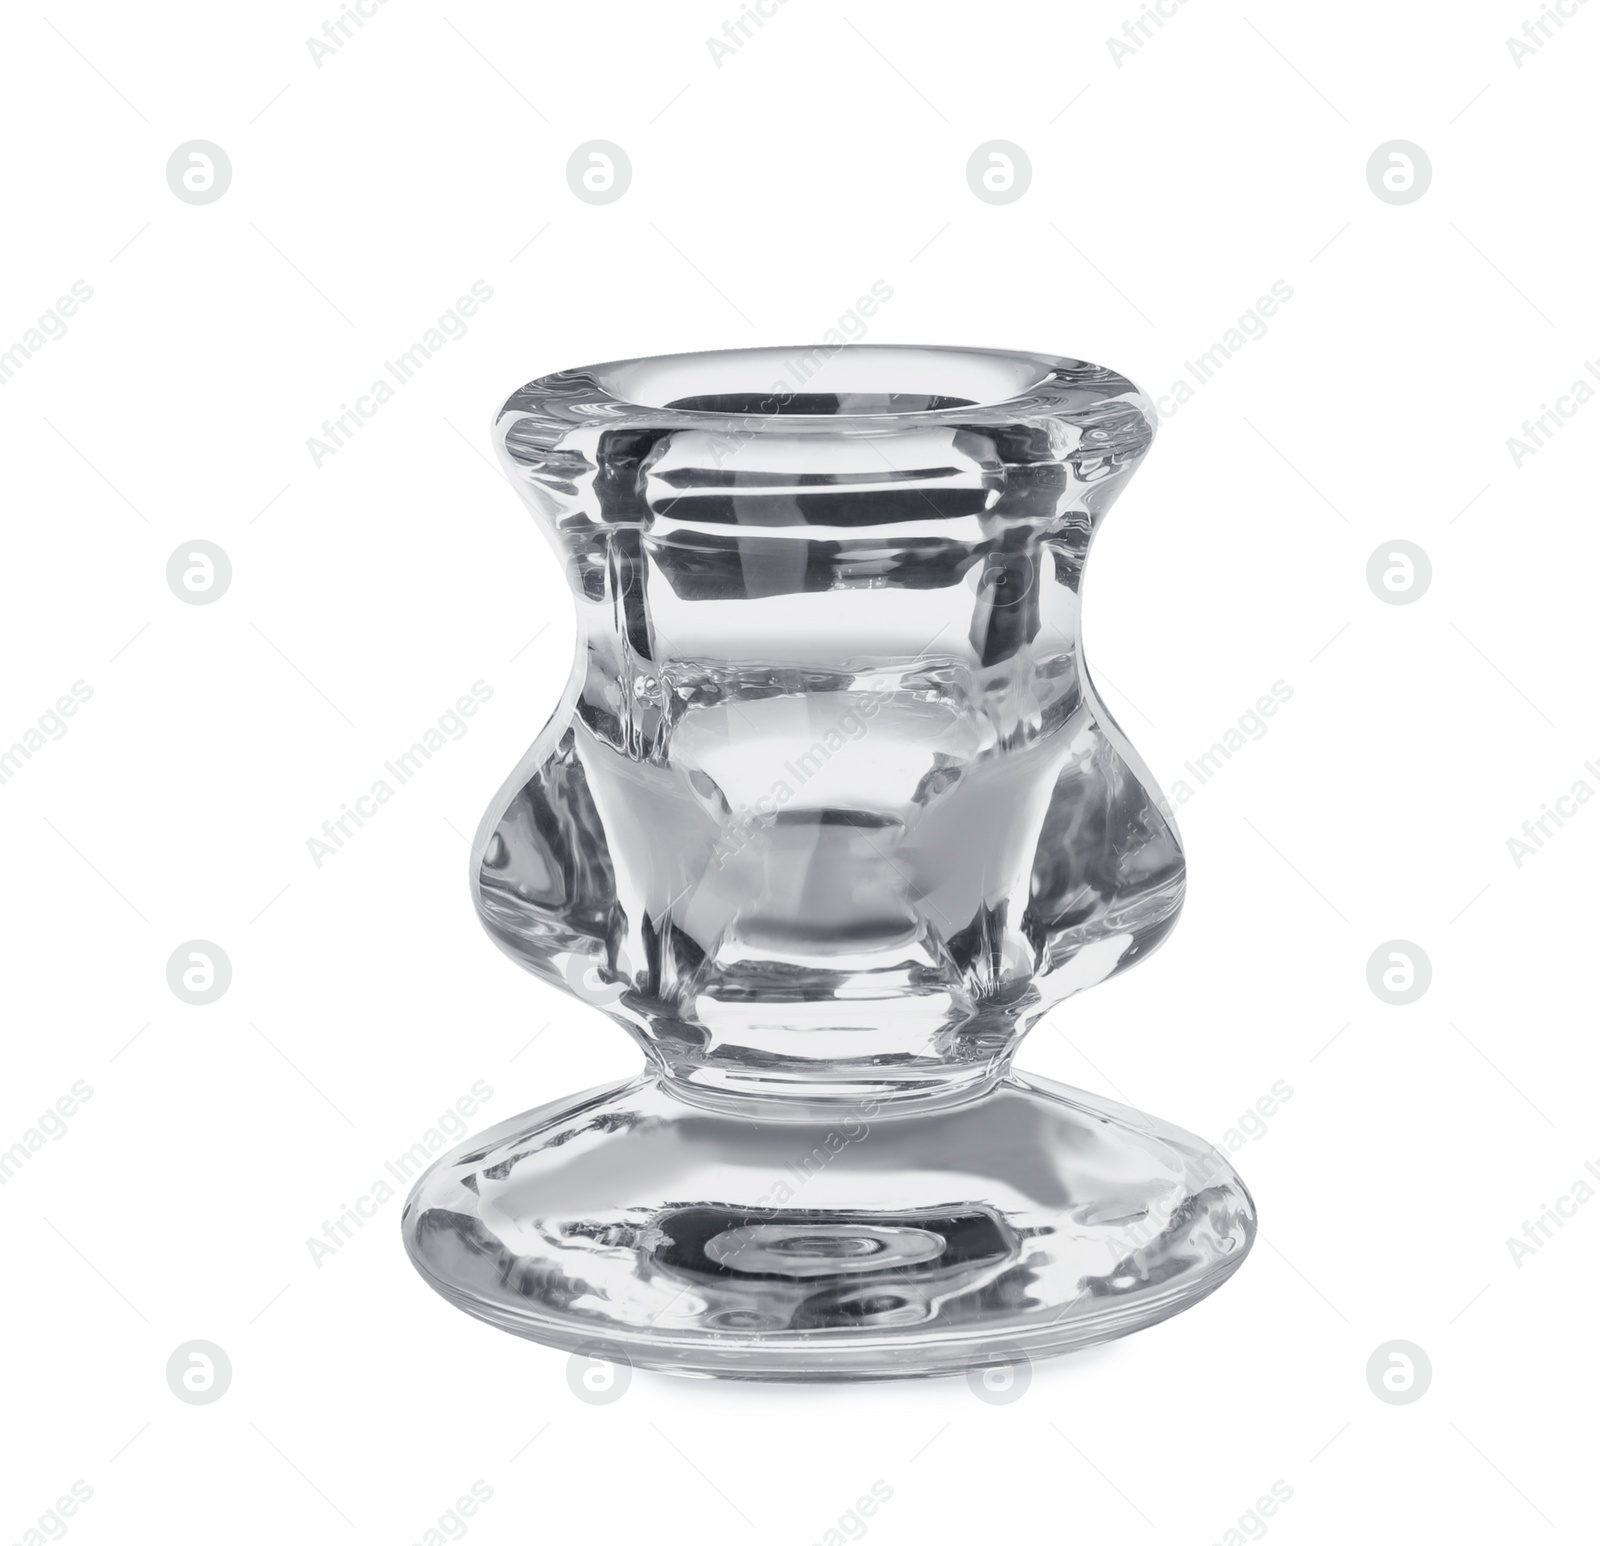 Photo of Small modern glass candlestick isolated on white